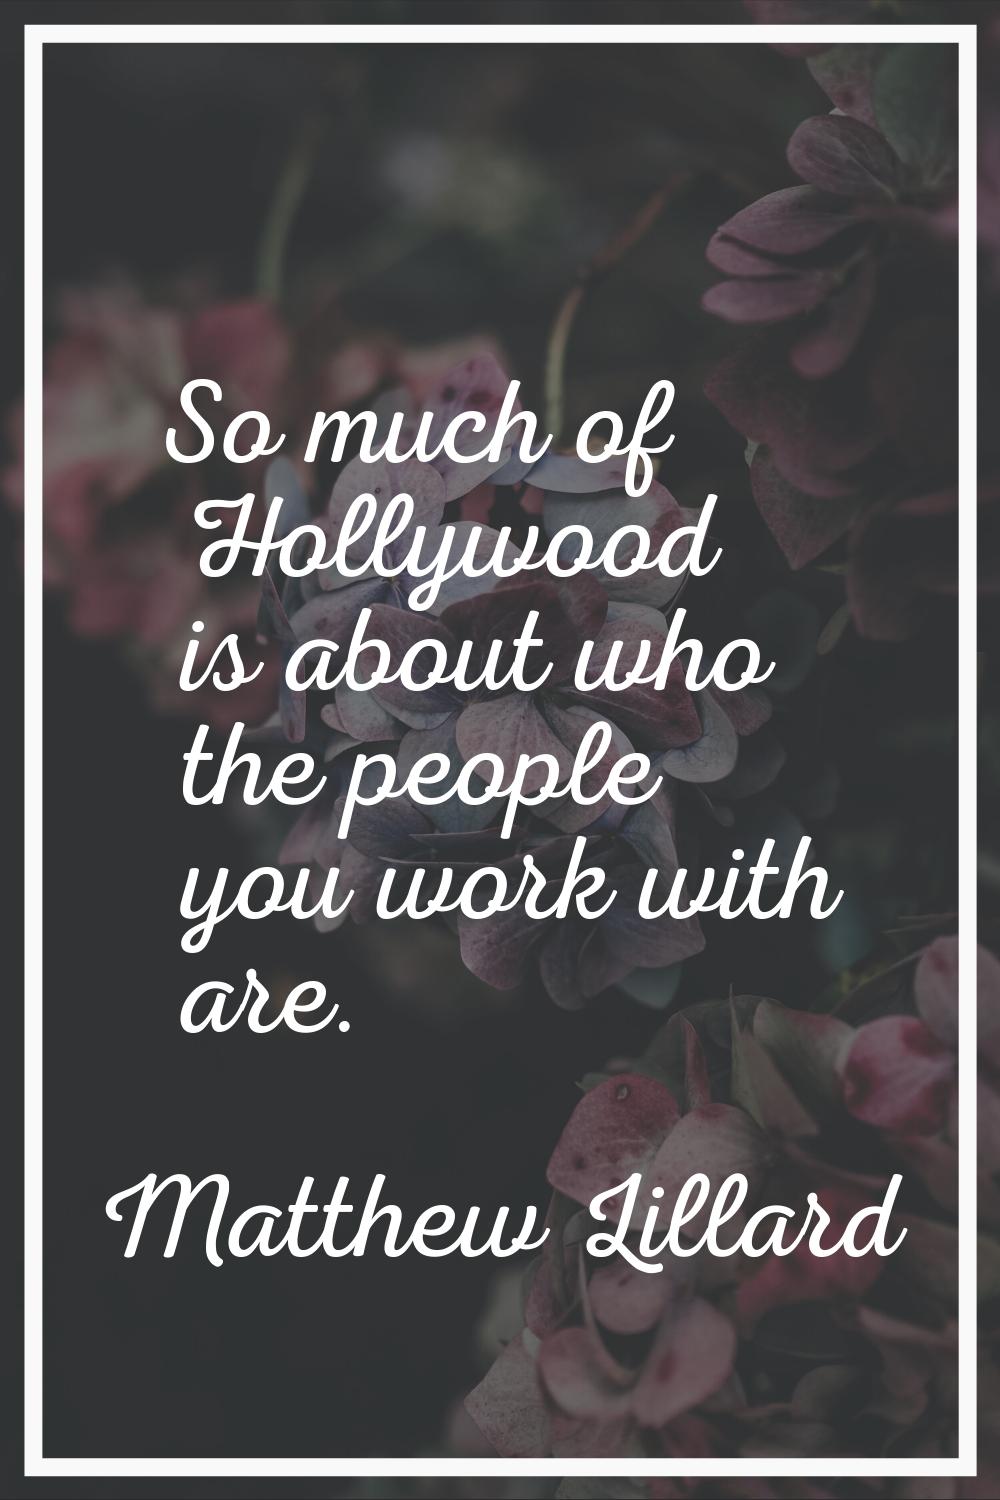 So much of Hollywood is about who the people you work with are.